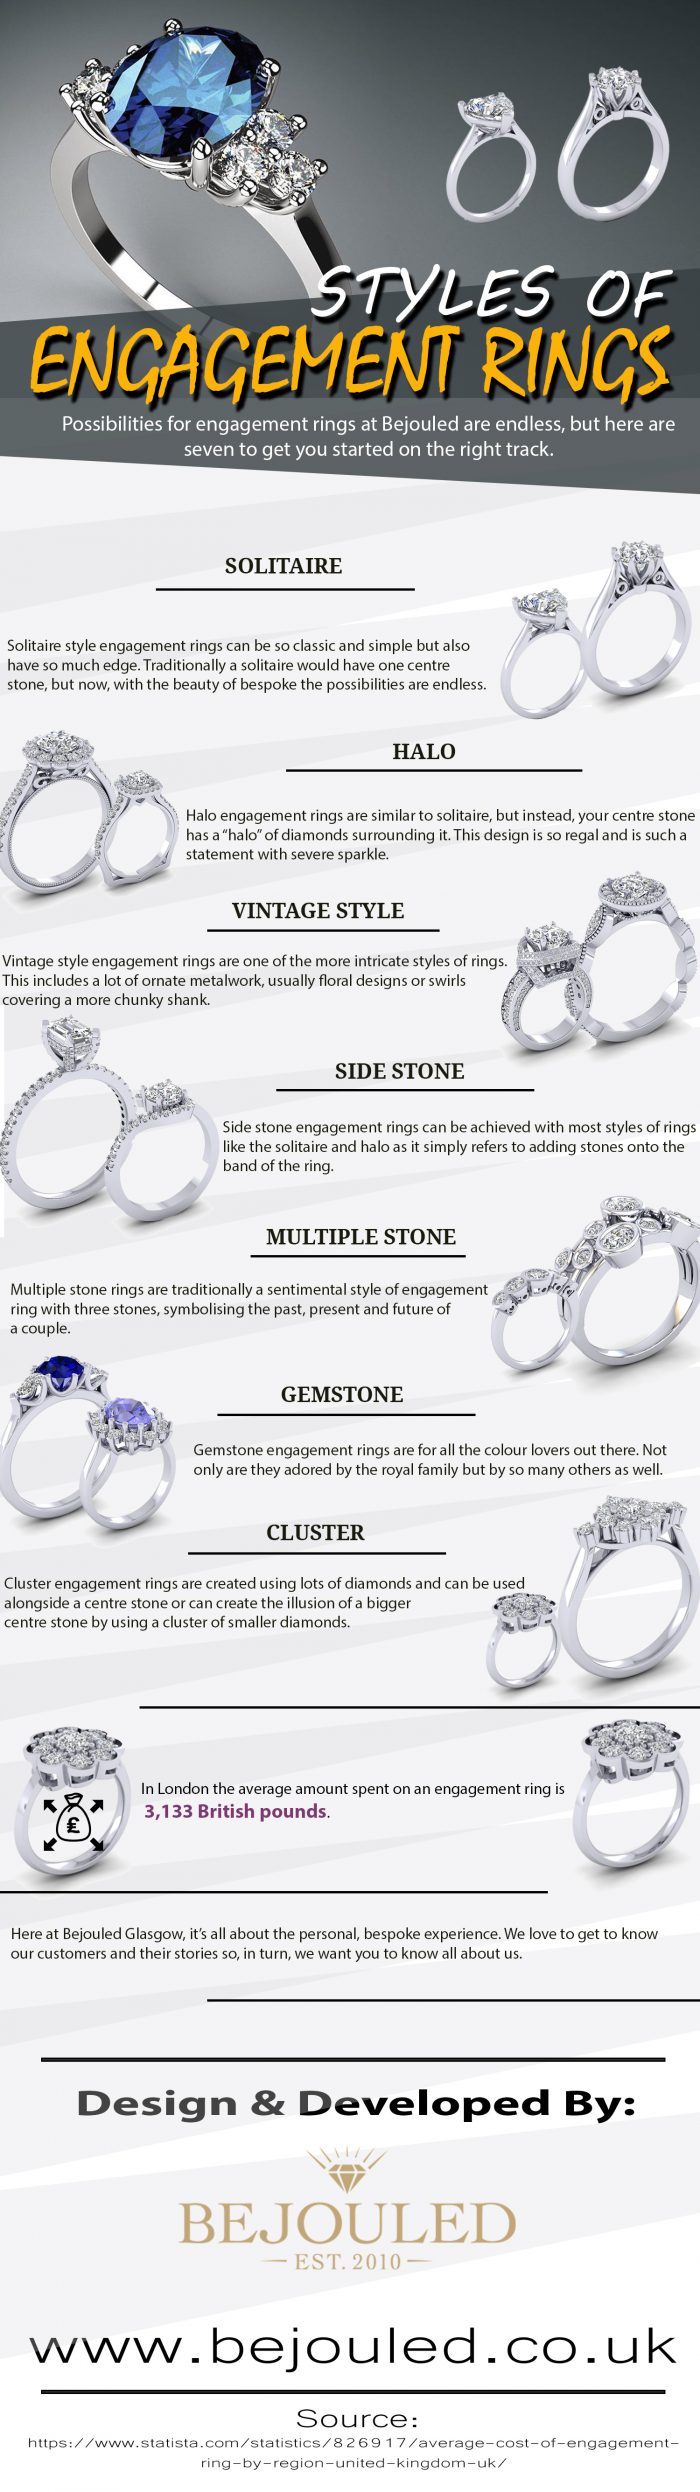 STYLES OF ENGAGEMENT RINGS